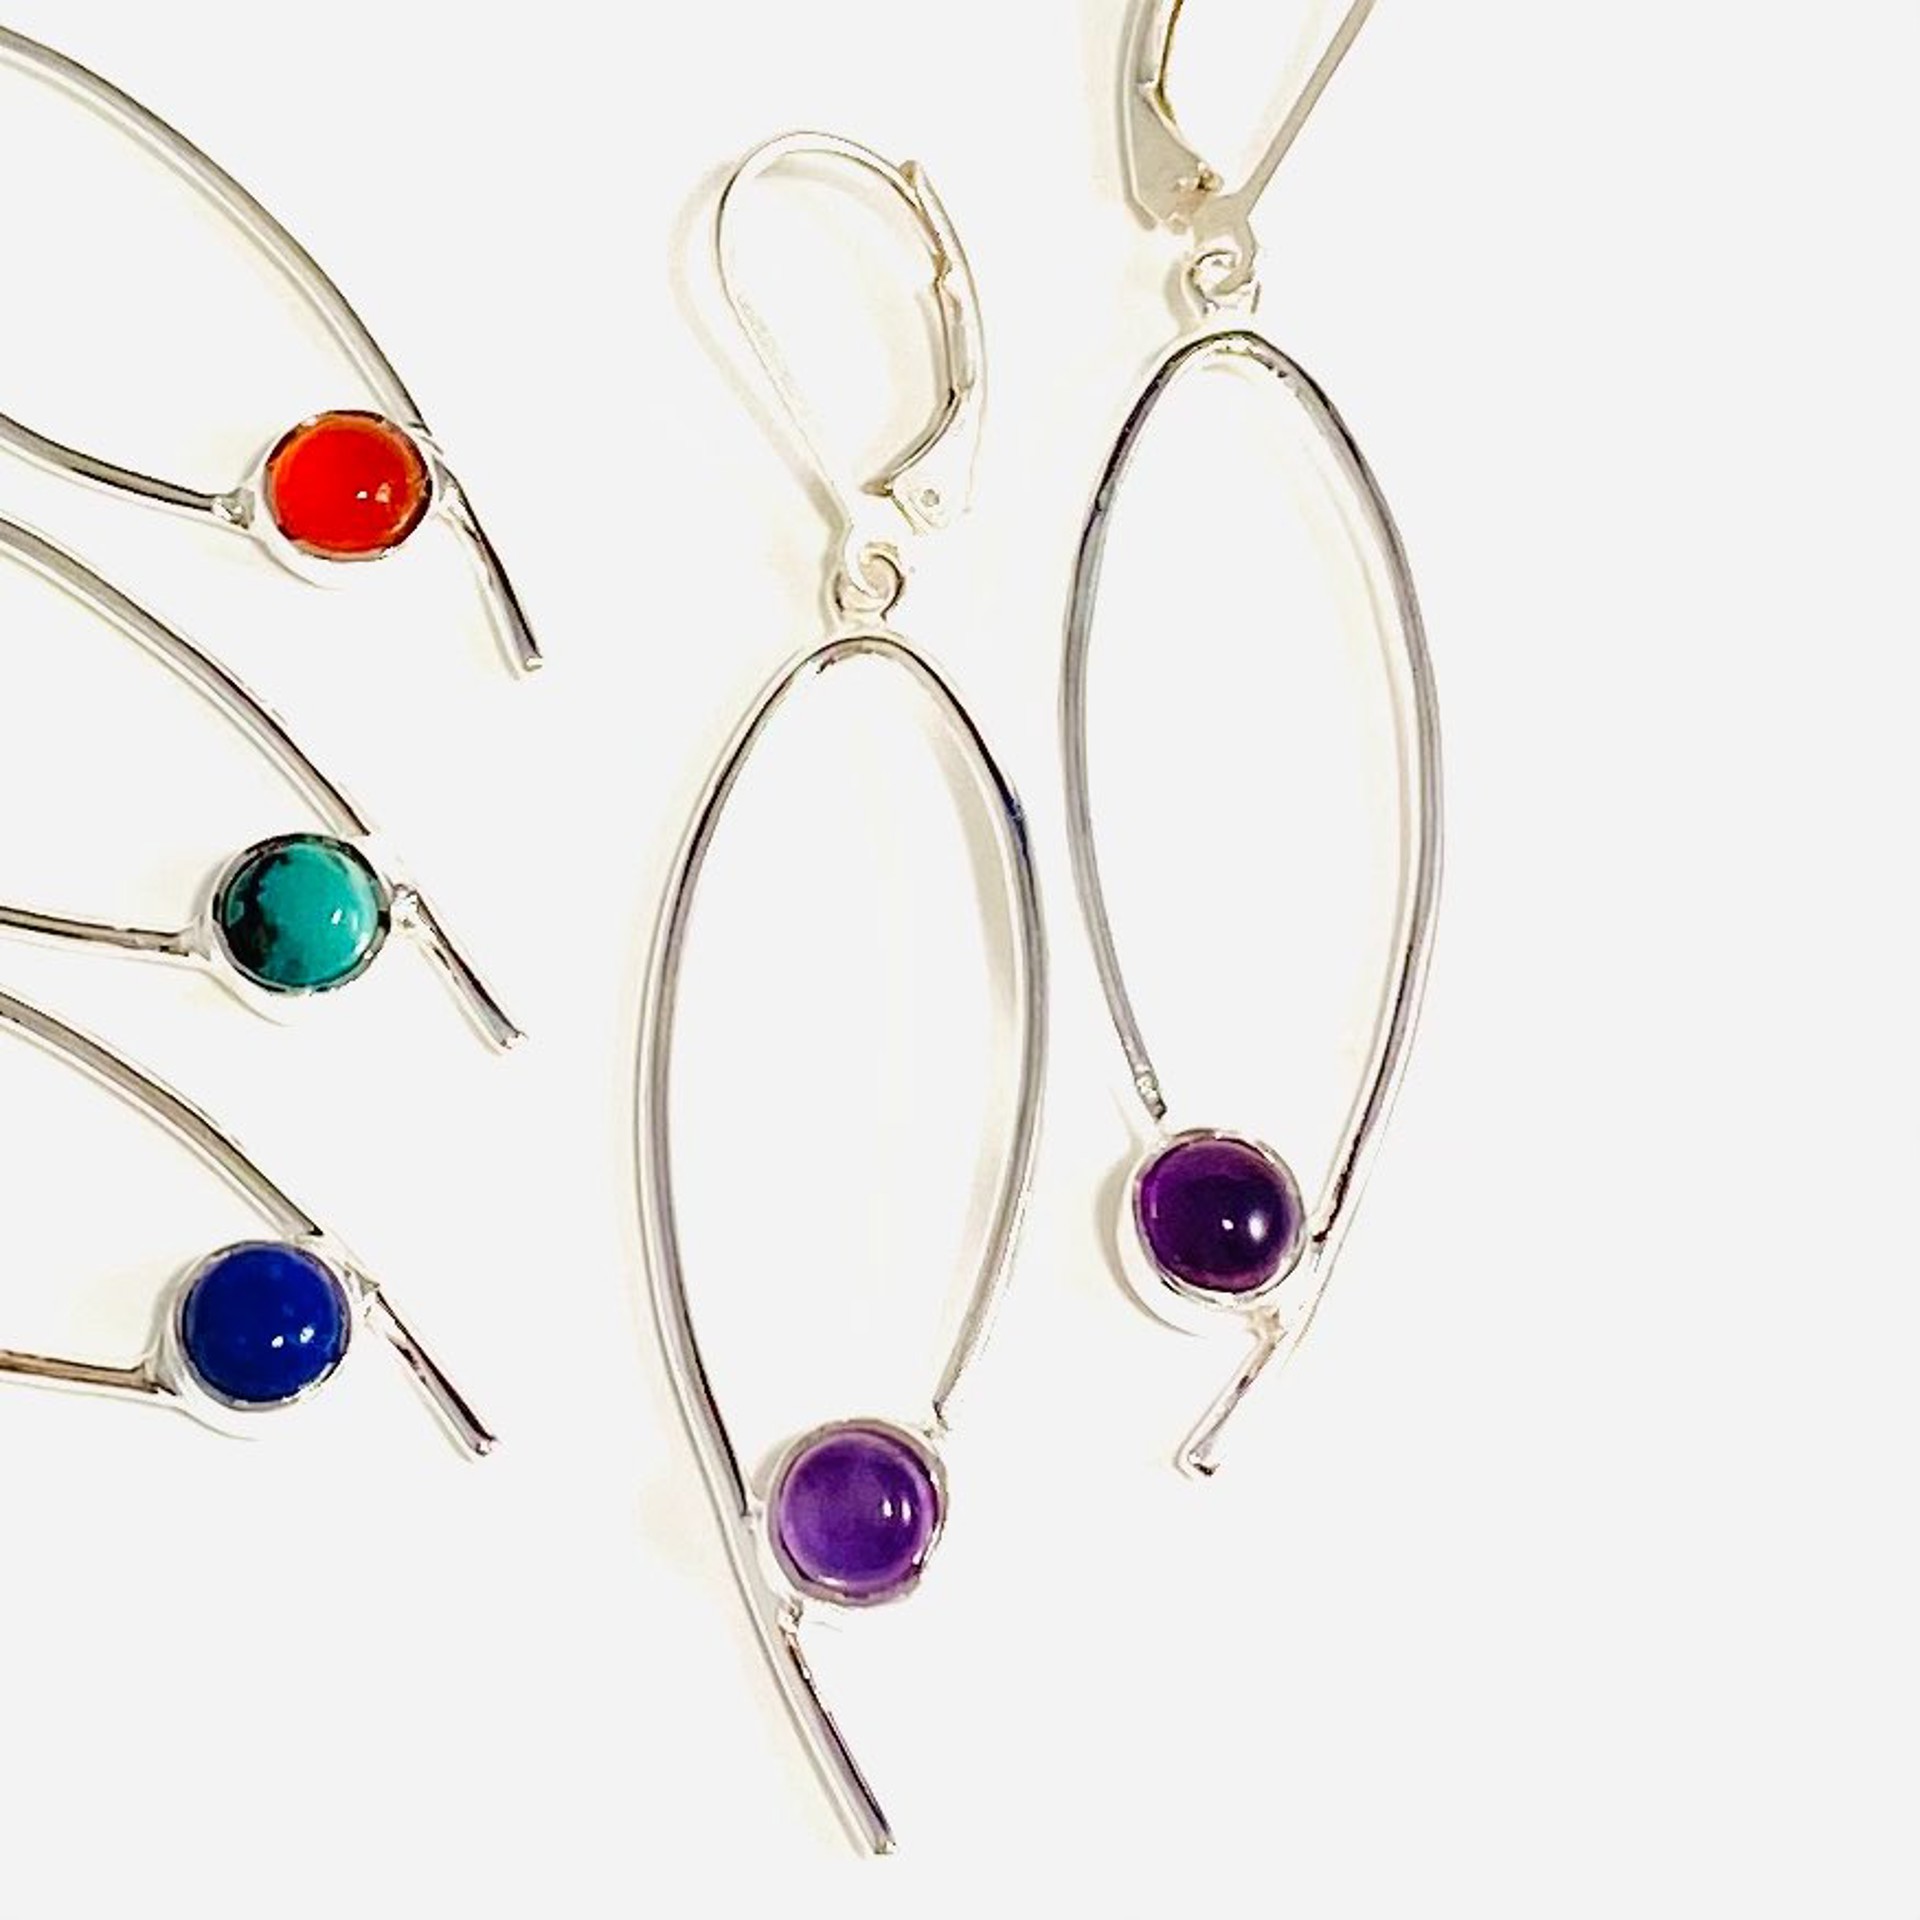 MON SE 3068 Onyx, Lapis, Turquoise or Carnelian Earrings, french wire clasp by Monica Mehta